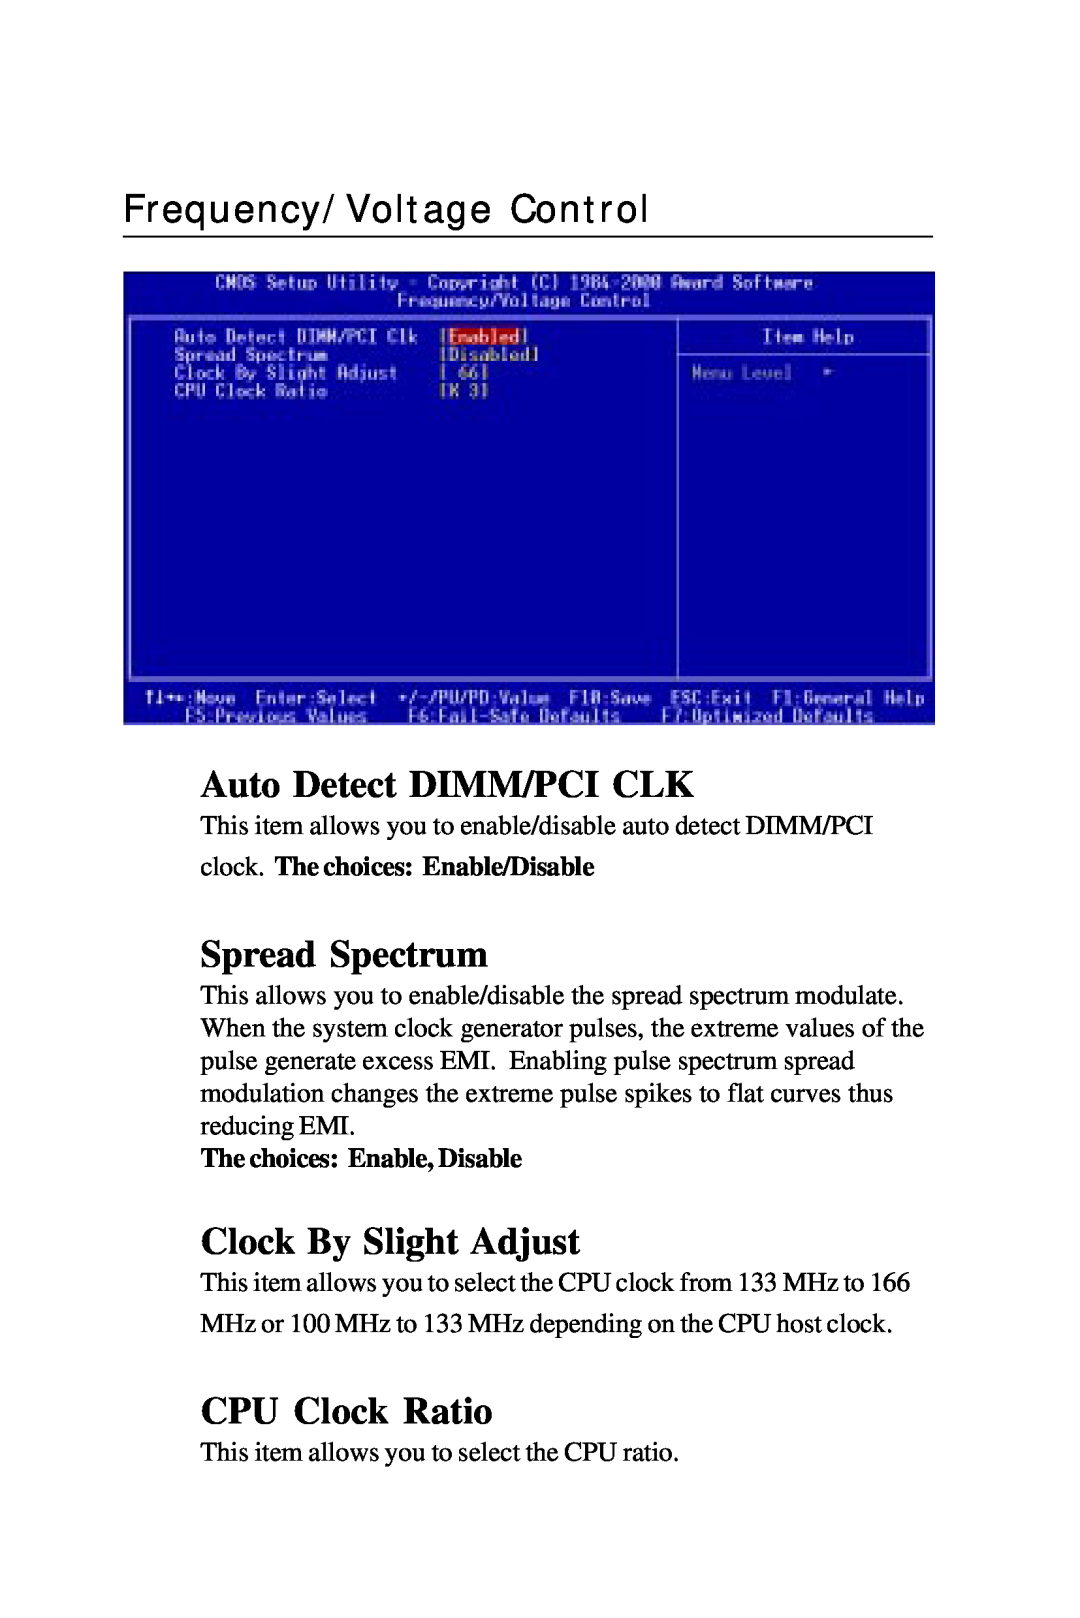 Intel PCM-6896 manual Frequency/Voltage Control, Auto Detect DIMM/PCI CLK, Spread Spectrum, Clock By Slight Adjust 